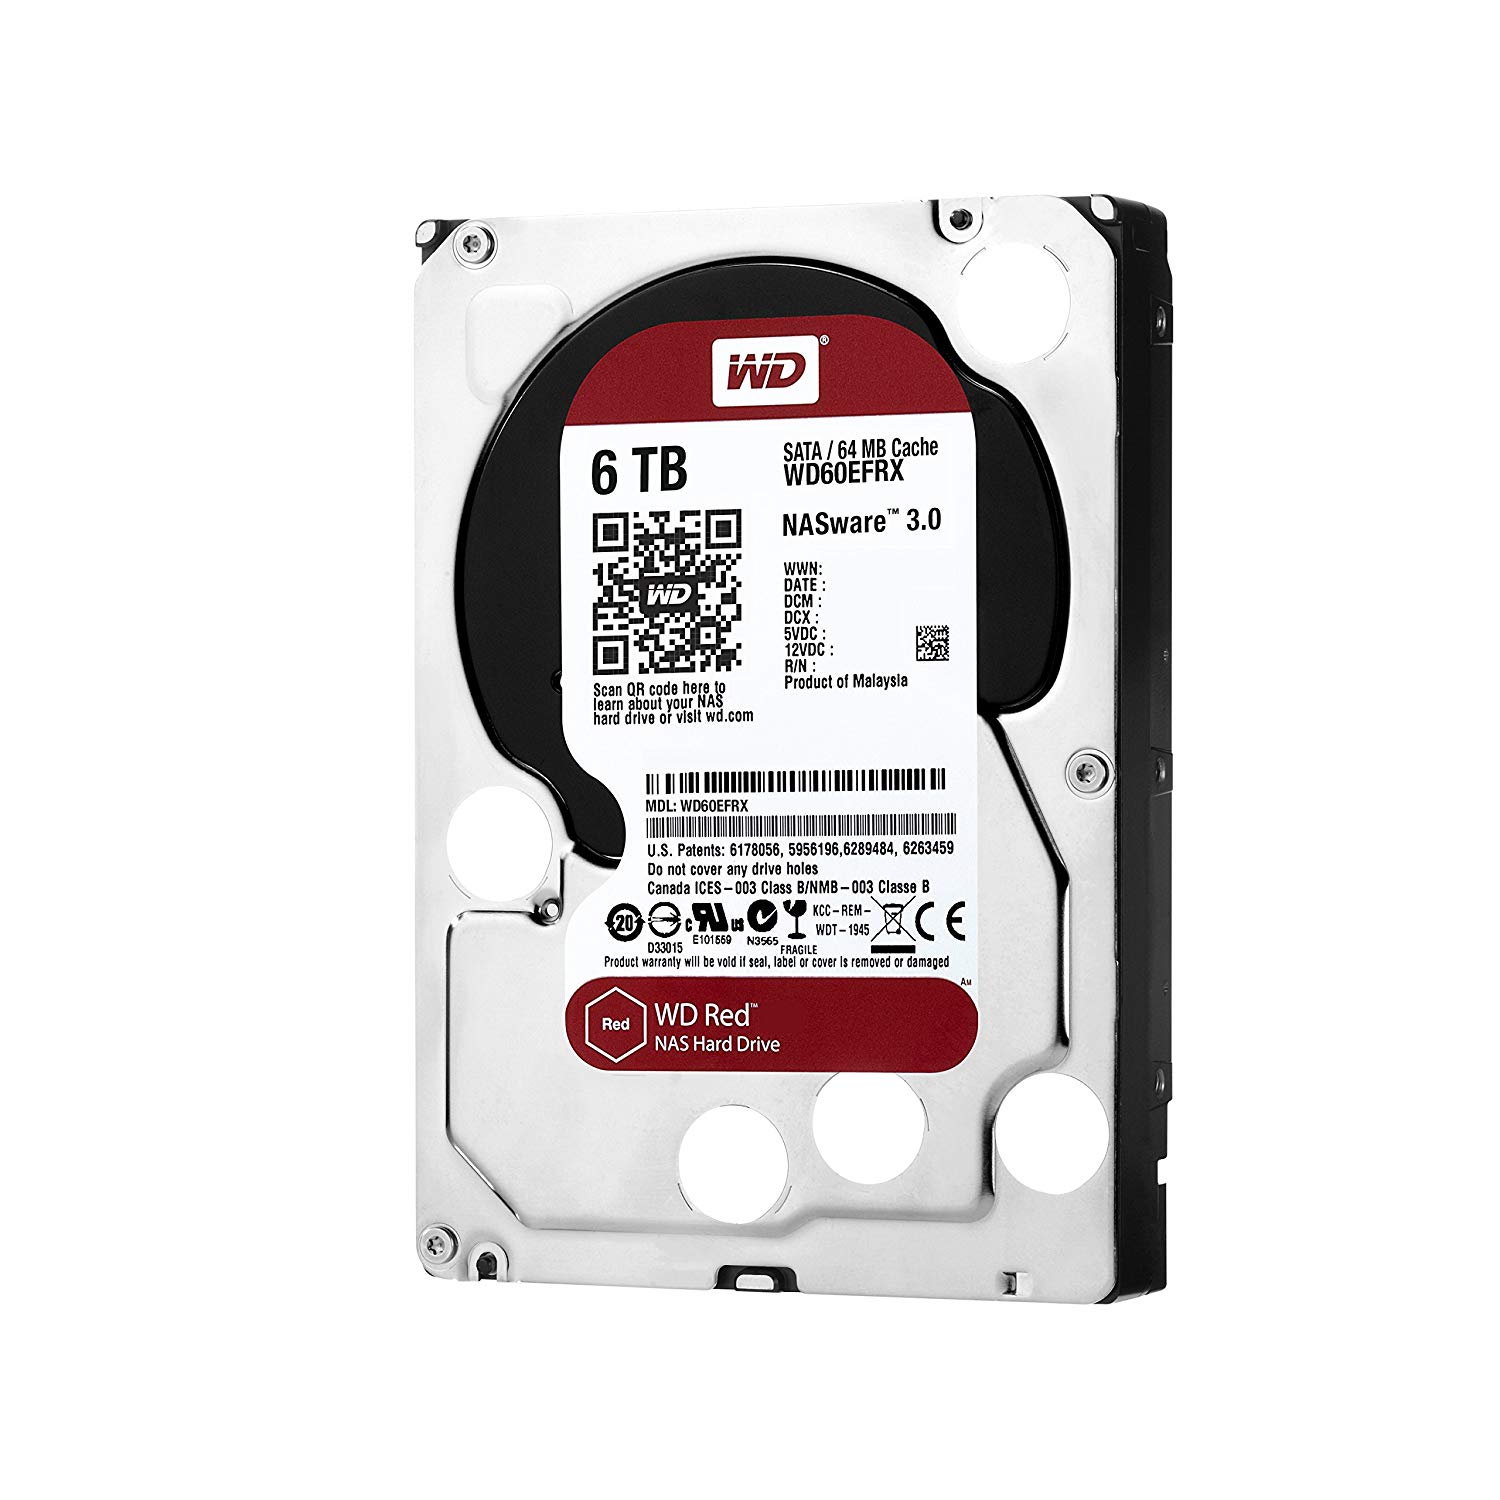 WD RED 6TB 5400RPM 64MB SATA3 6Gbit/sn WD60EFRX NAS HDD